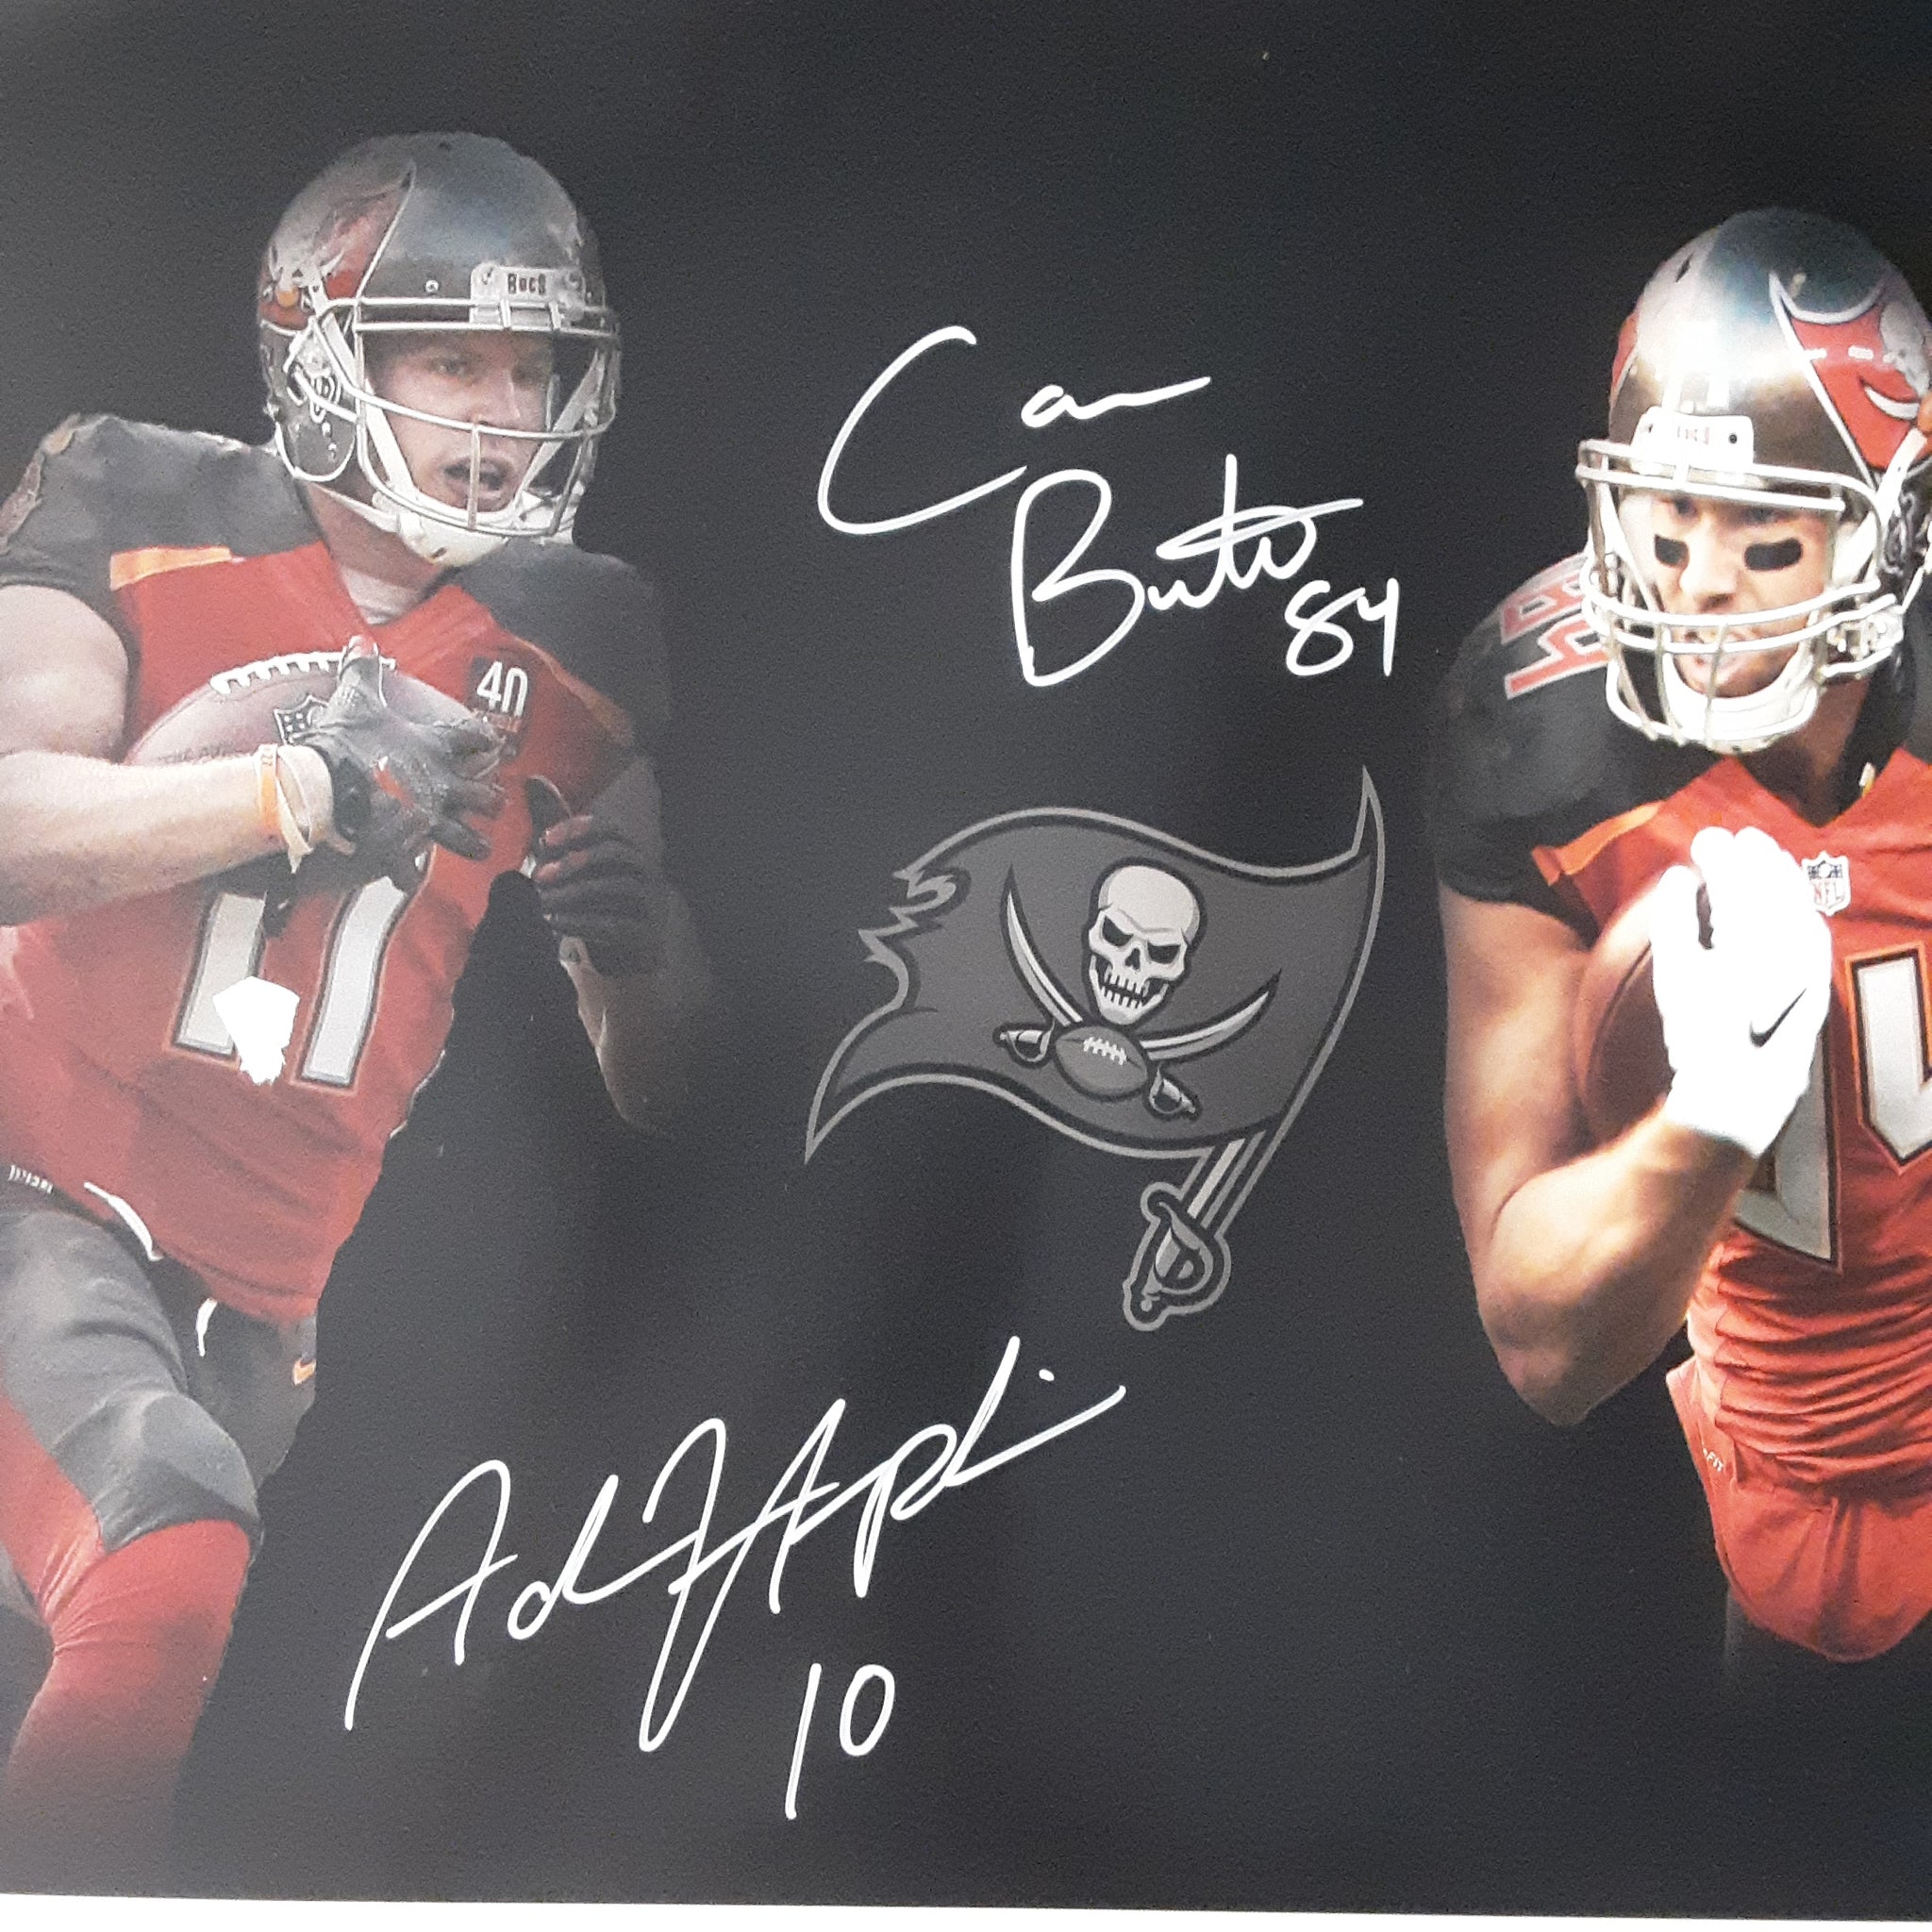 Cameron Brate and Adam Humphries Authentic Signed 16x20 Photo Autographed JSA.